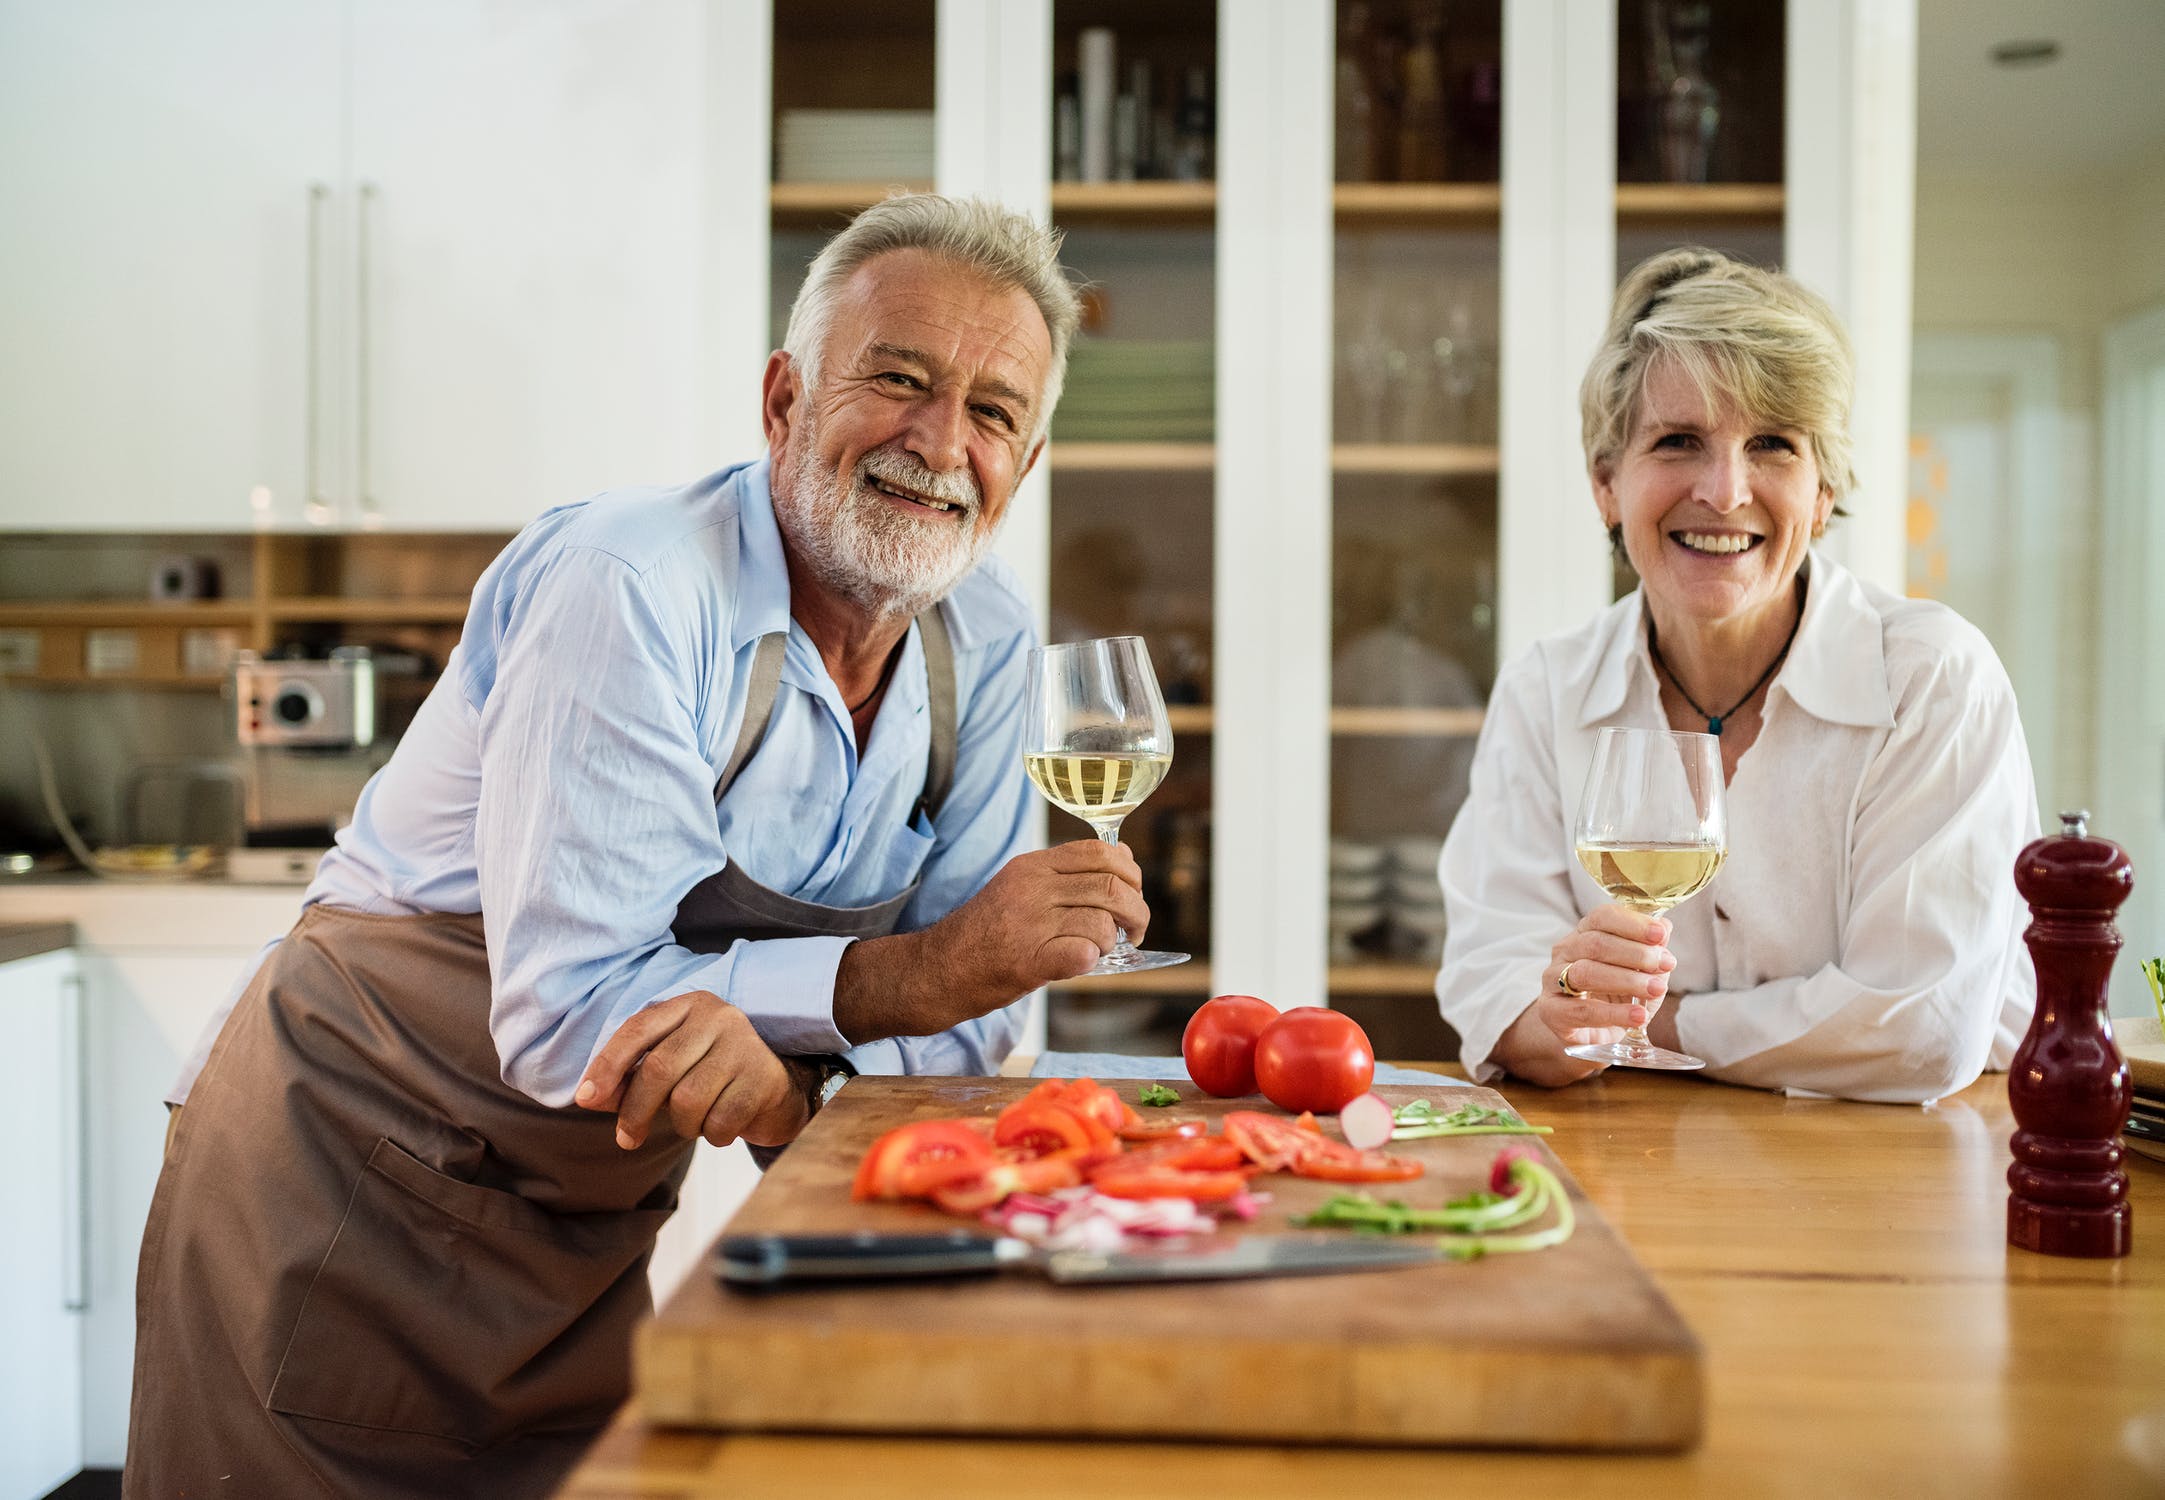 5 Ways to Keep the Romance Alive in Old Age